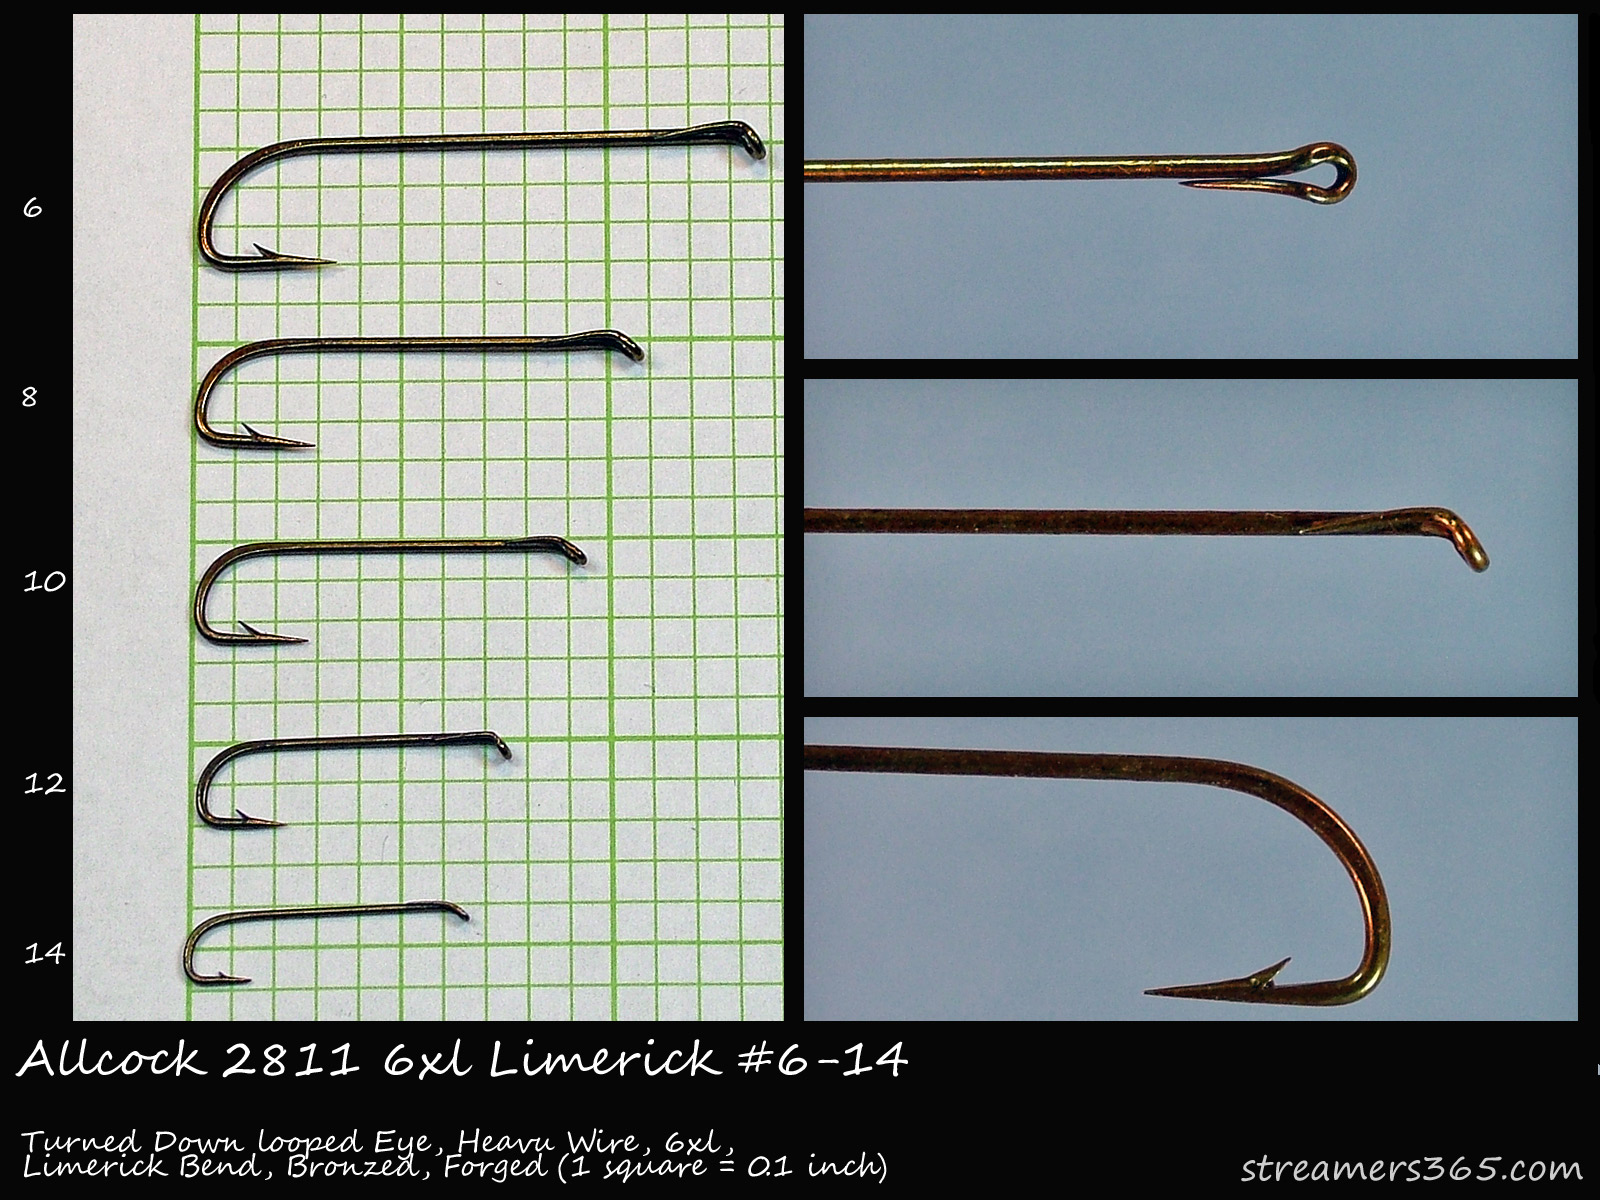 3 New Hooks Added to the Reference Page, Global FlyFisher